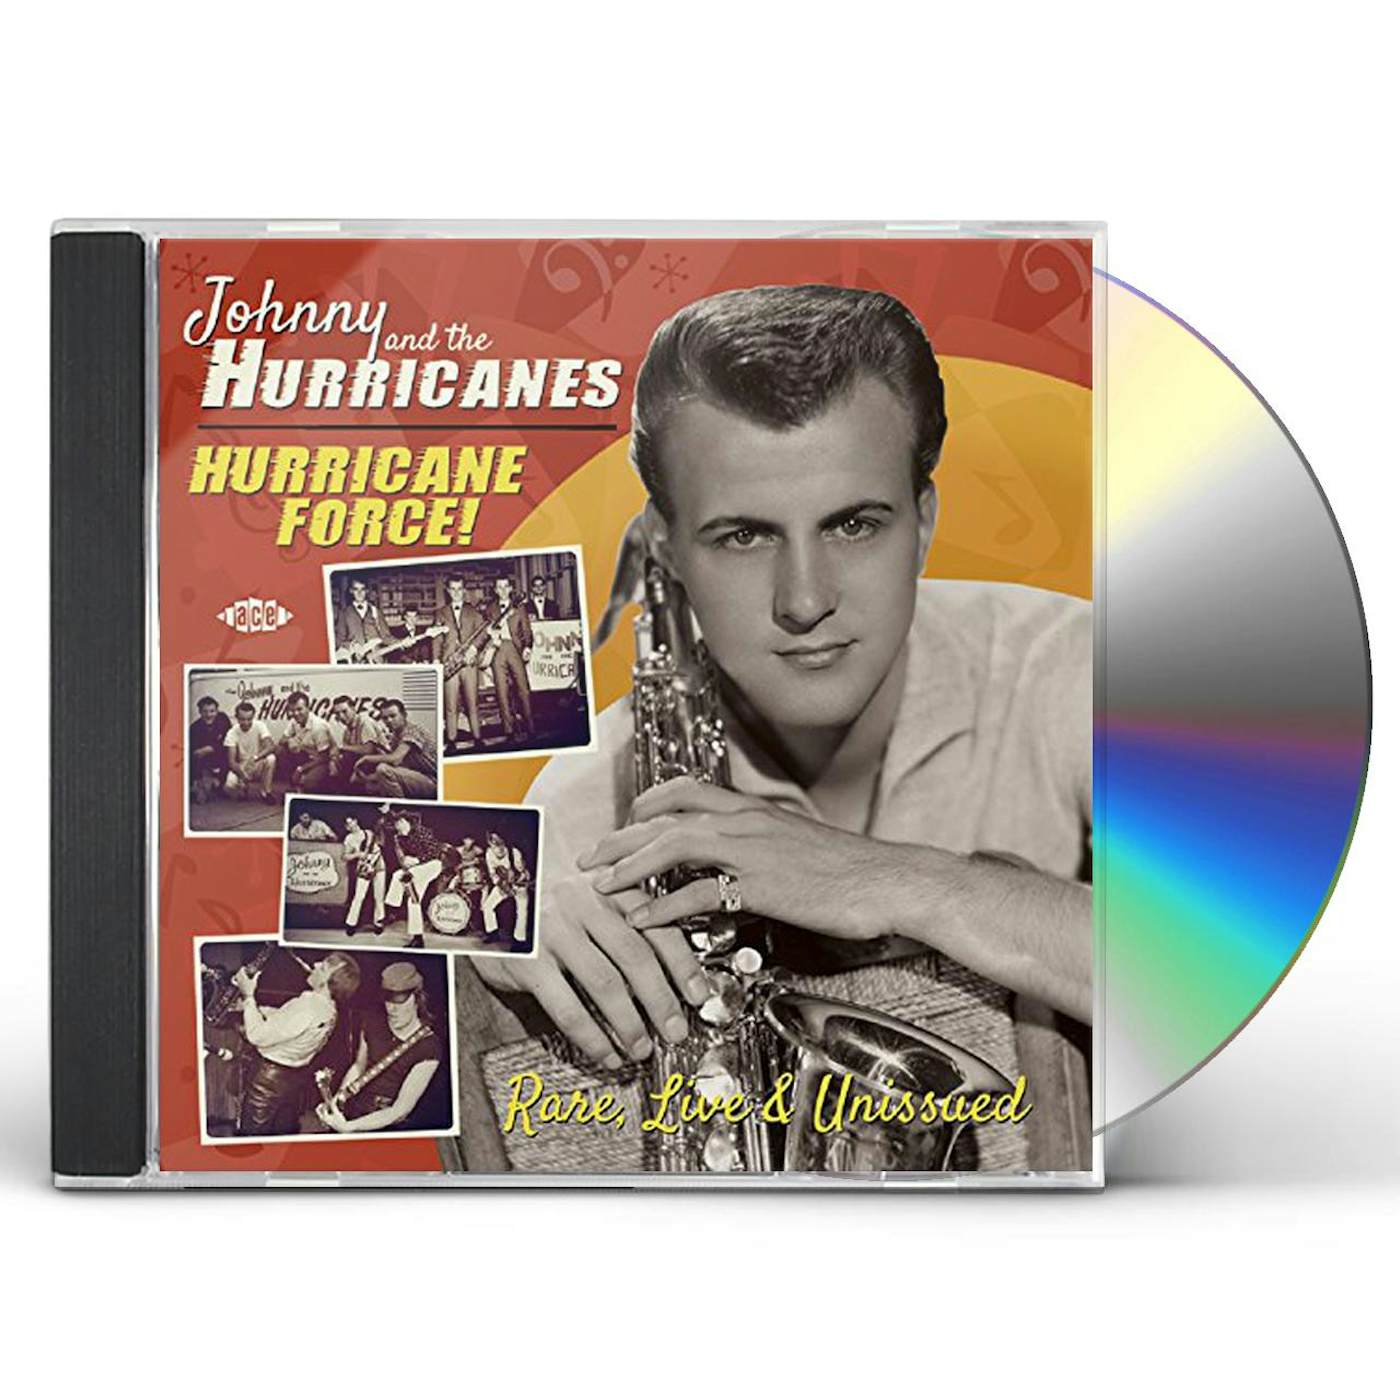 Johnny & The Hurricanes HURRICANE FORCE RARE LIVE & UNISSUED CD